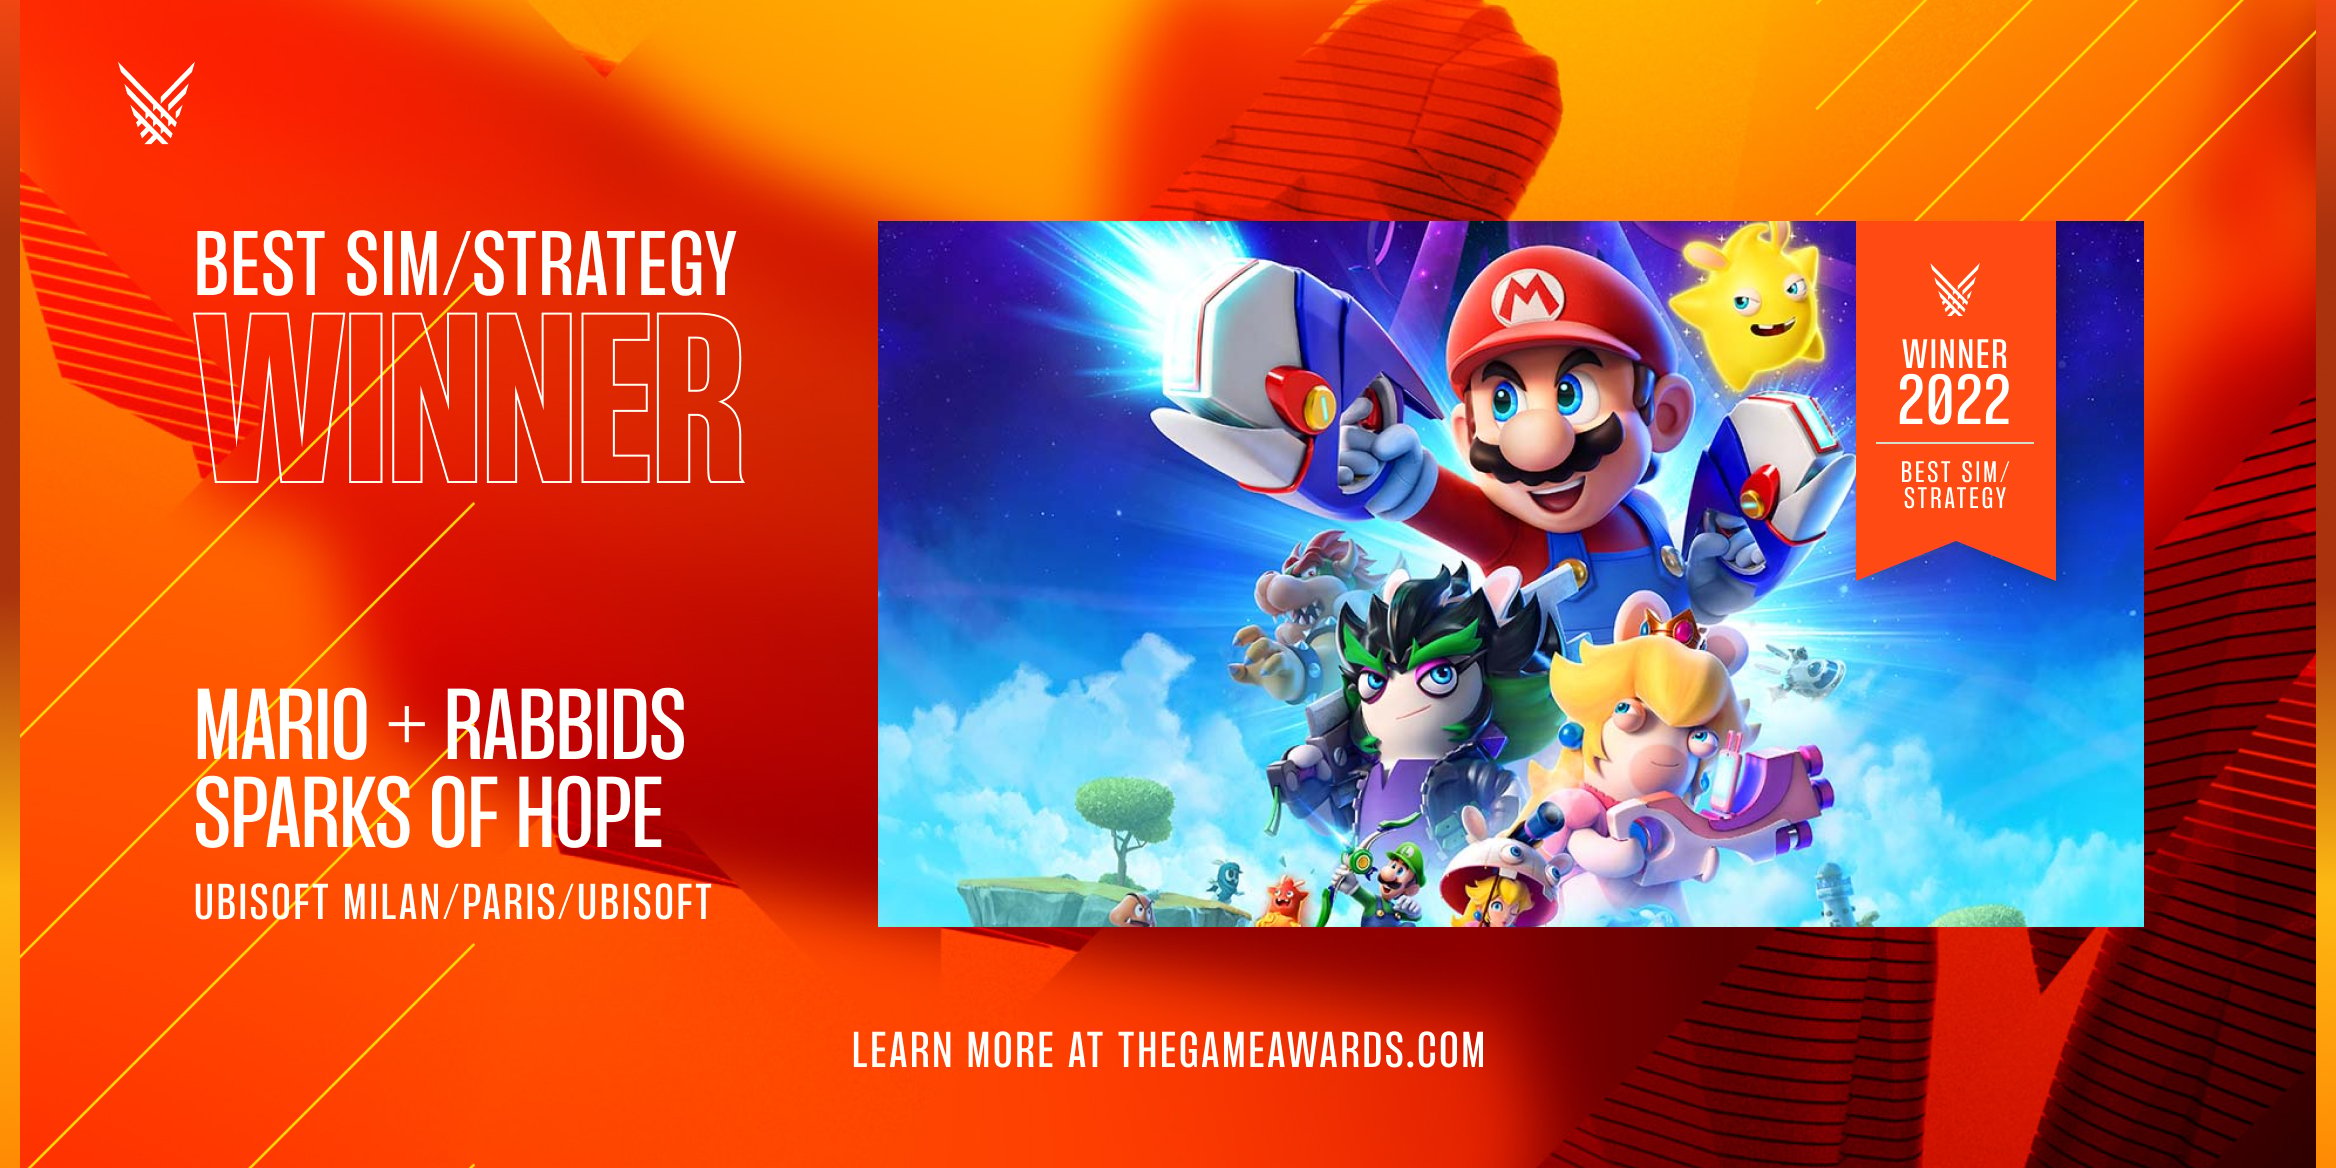 The Game Awards 2022: Here Are All the Winners at the Annual Video